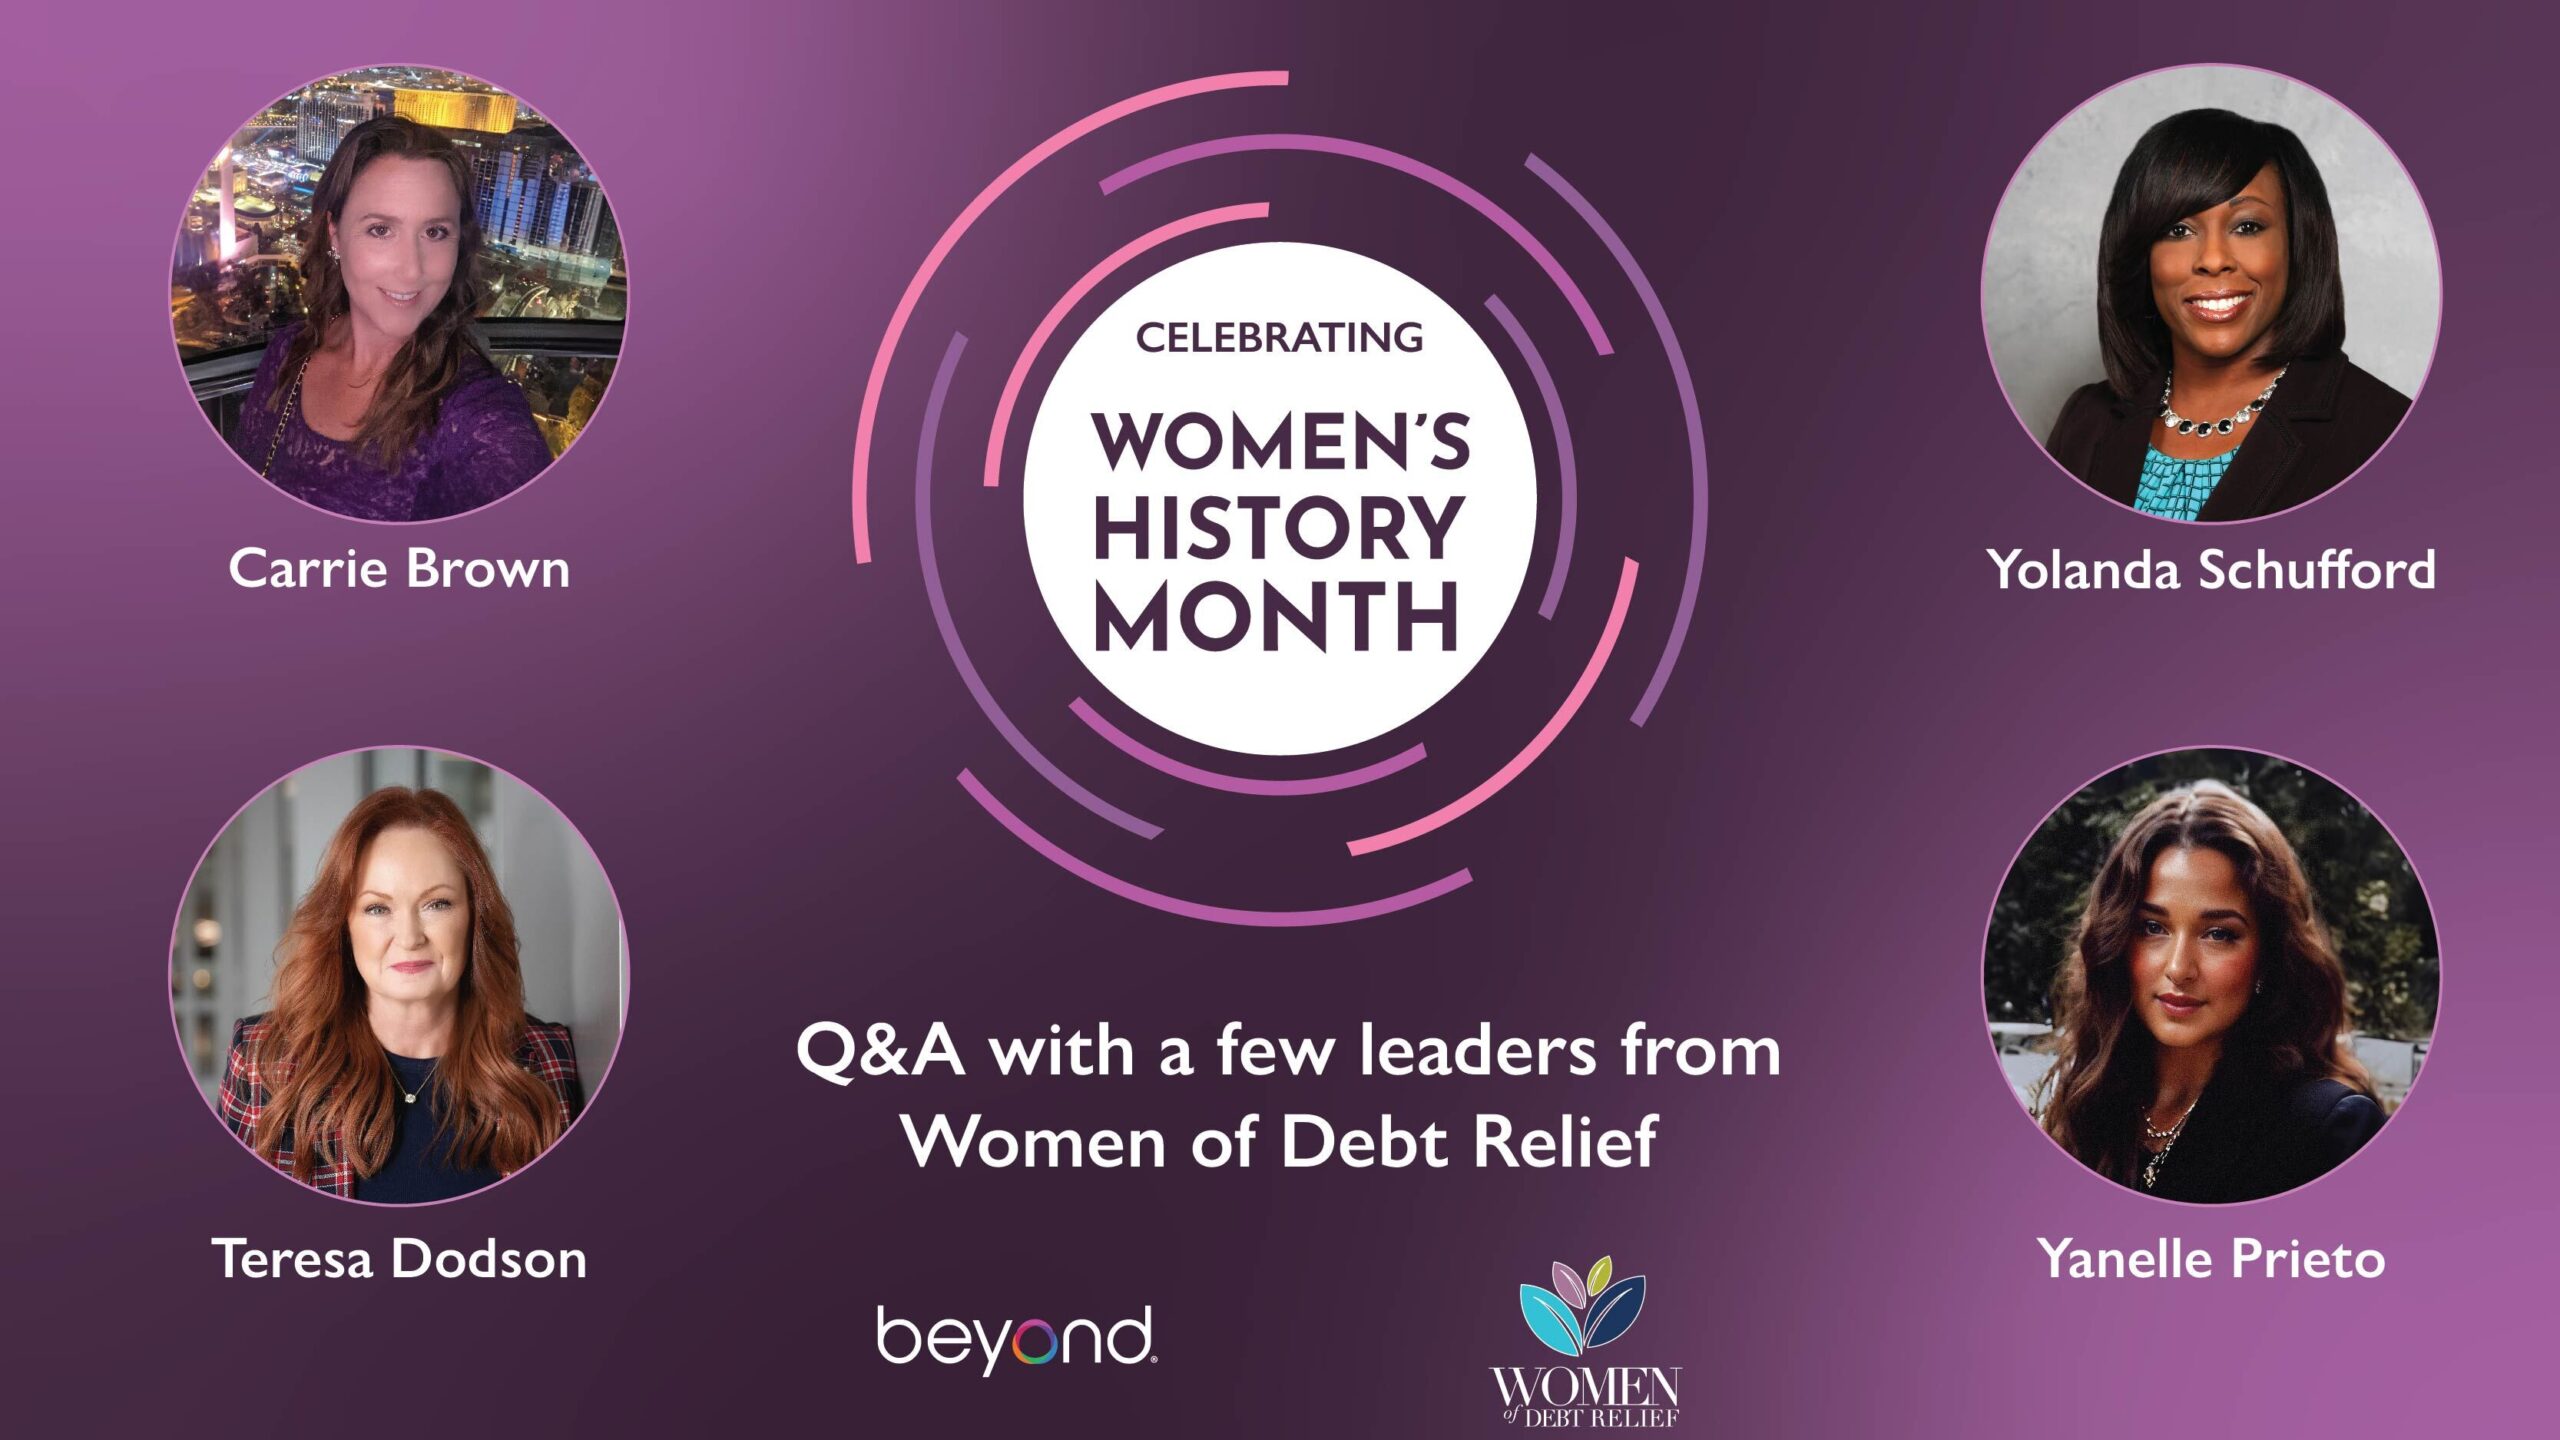 Women of Debt Relief leading the financial services industry